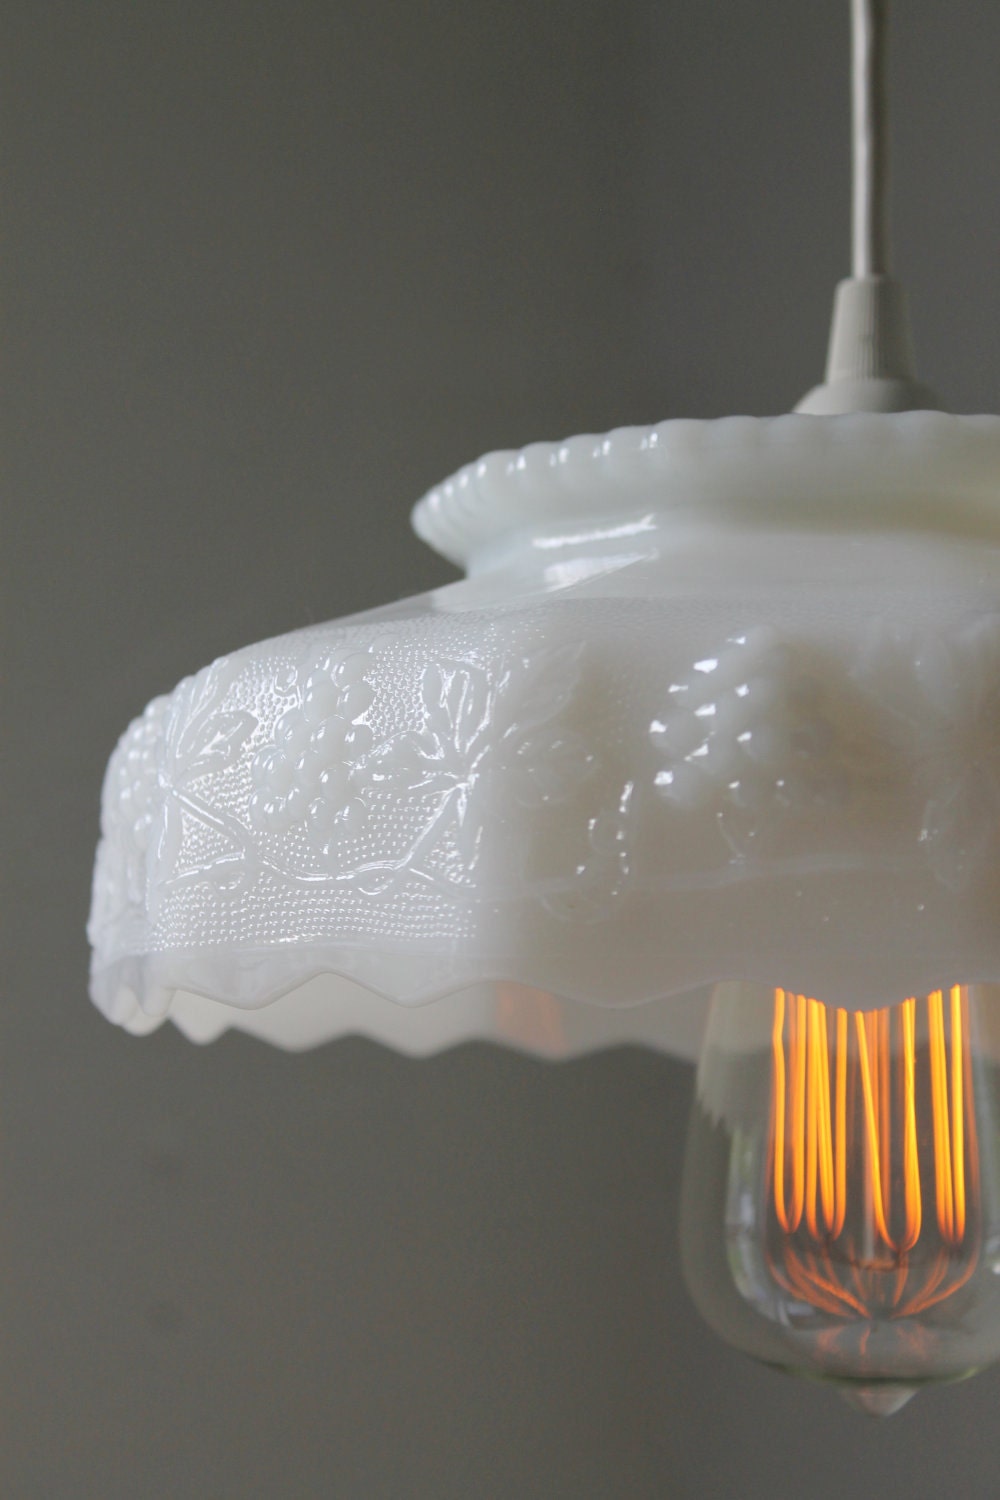 Cloud - Upcycled Vintage Anchor Hocking Fire King White Milk Glass Fruit Bowl Hanging Pendant Light - OOAK BootsNGus Lamp Lighting Fixture